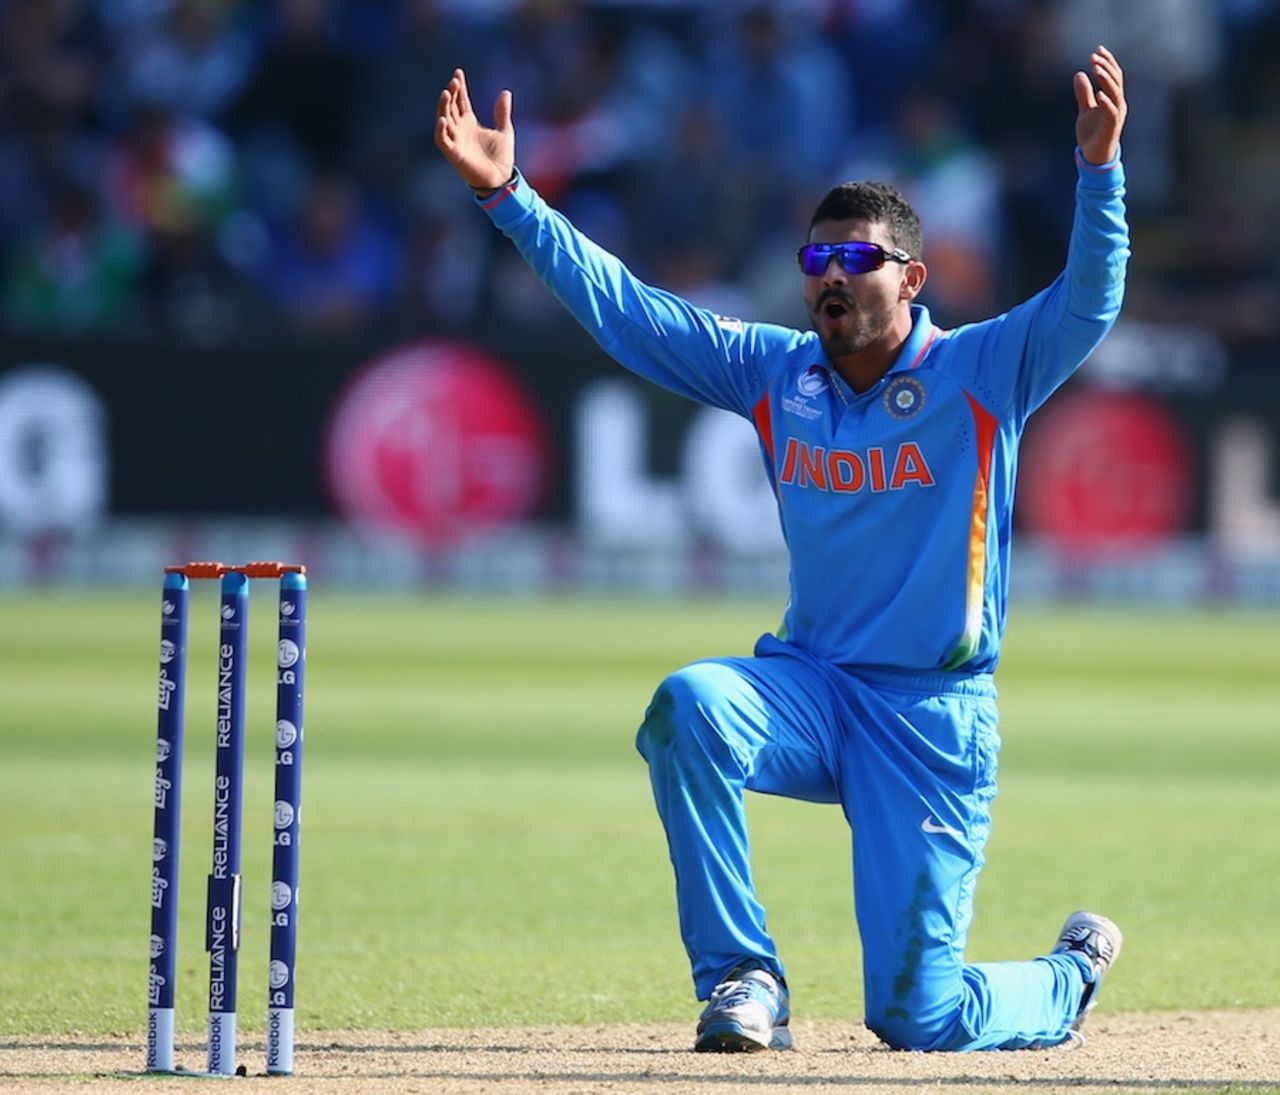 Ravindra Jadeja appeals for a wicket, India v South Africa, Champions Trophy, Group B, Cardiff, June 6, 2013